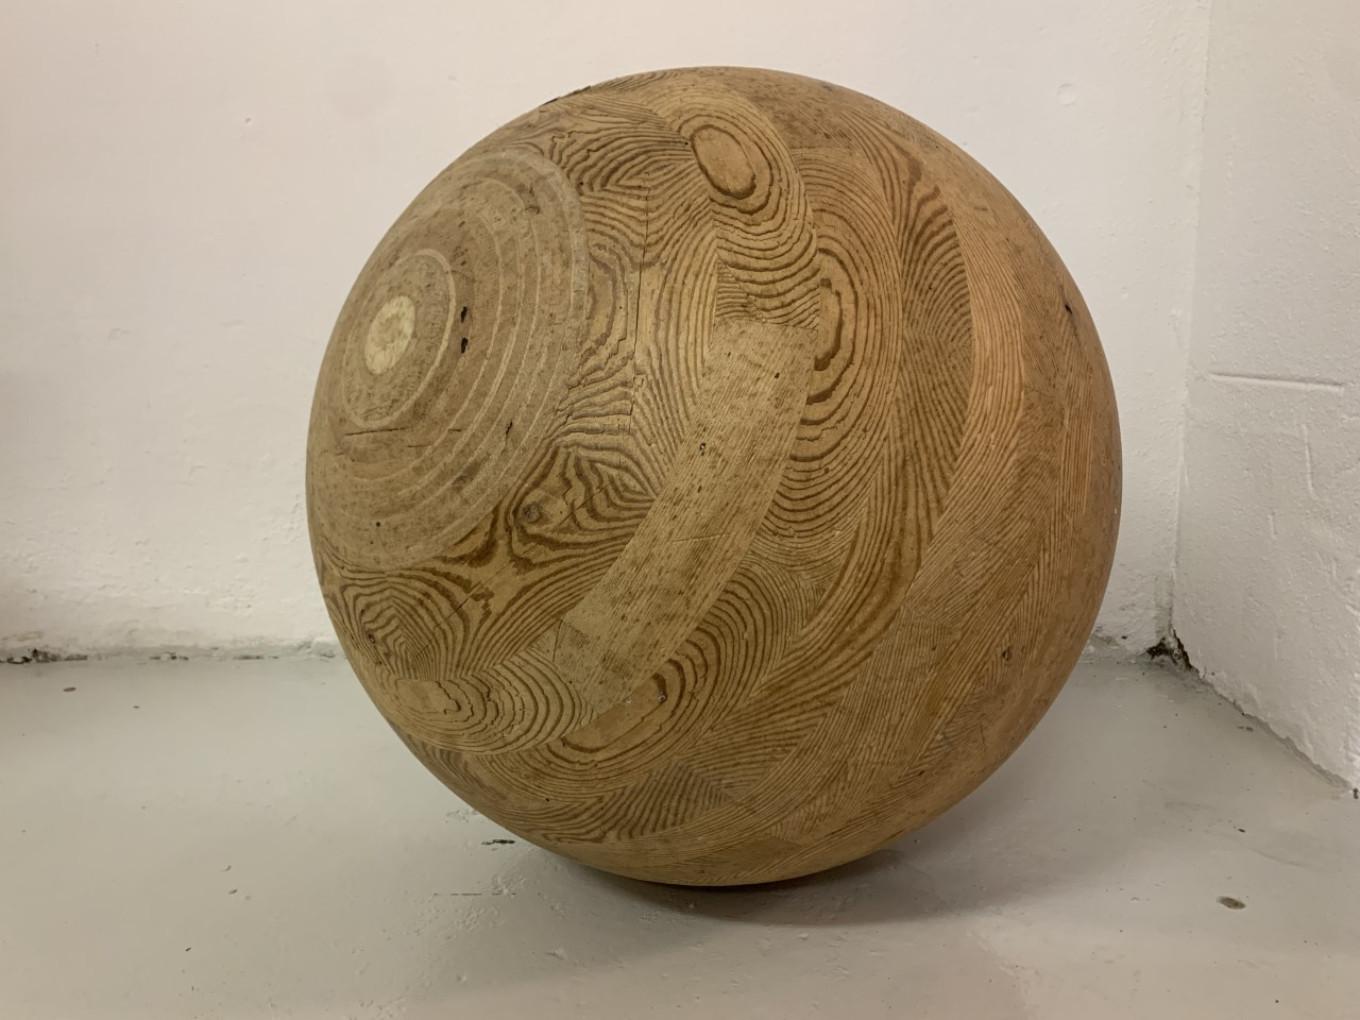 Rare and unique handmade Circus acrobatic ball from a former Dutch Circus.
This very heavy ball was used by acrobats to walk on top of these balls.
Made of thick solid slieces of wood. In a good condition
Diameter 70 cm
Very heavy piece 50 - 60